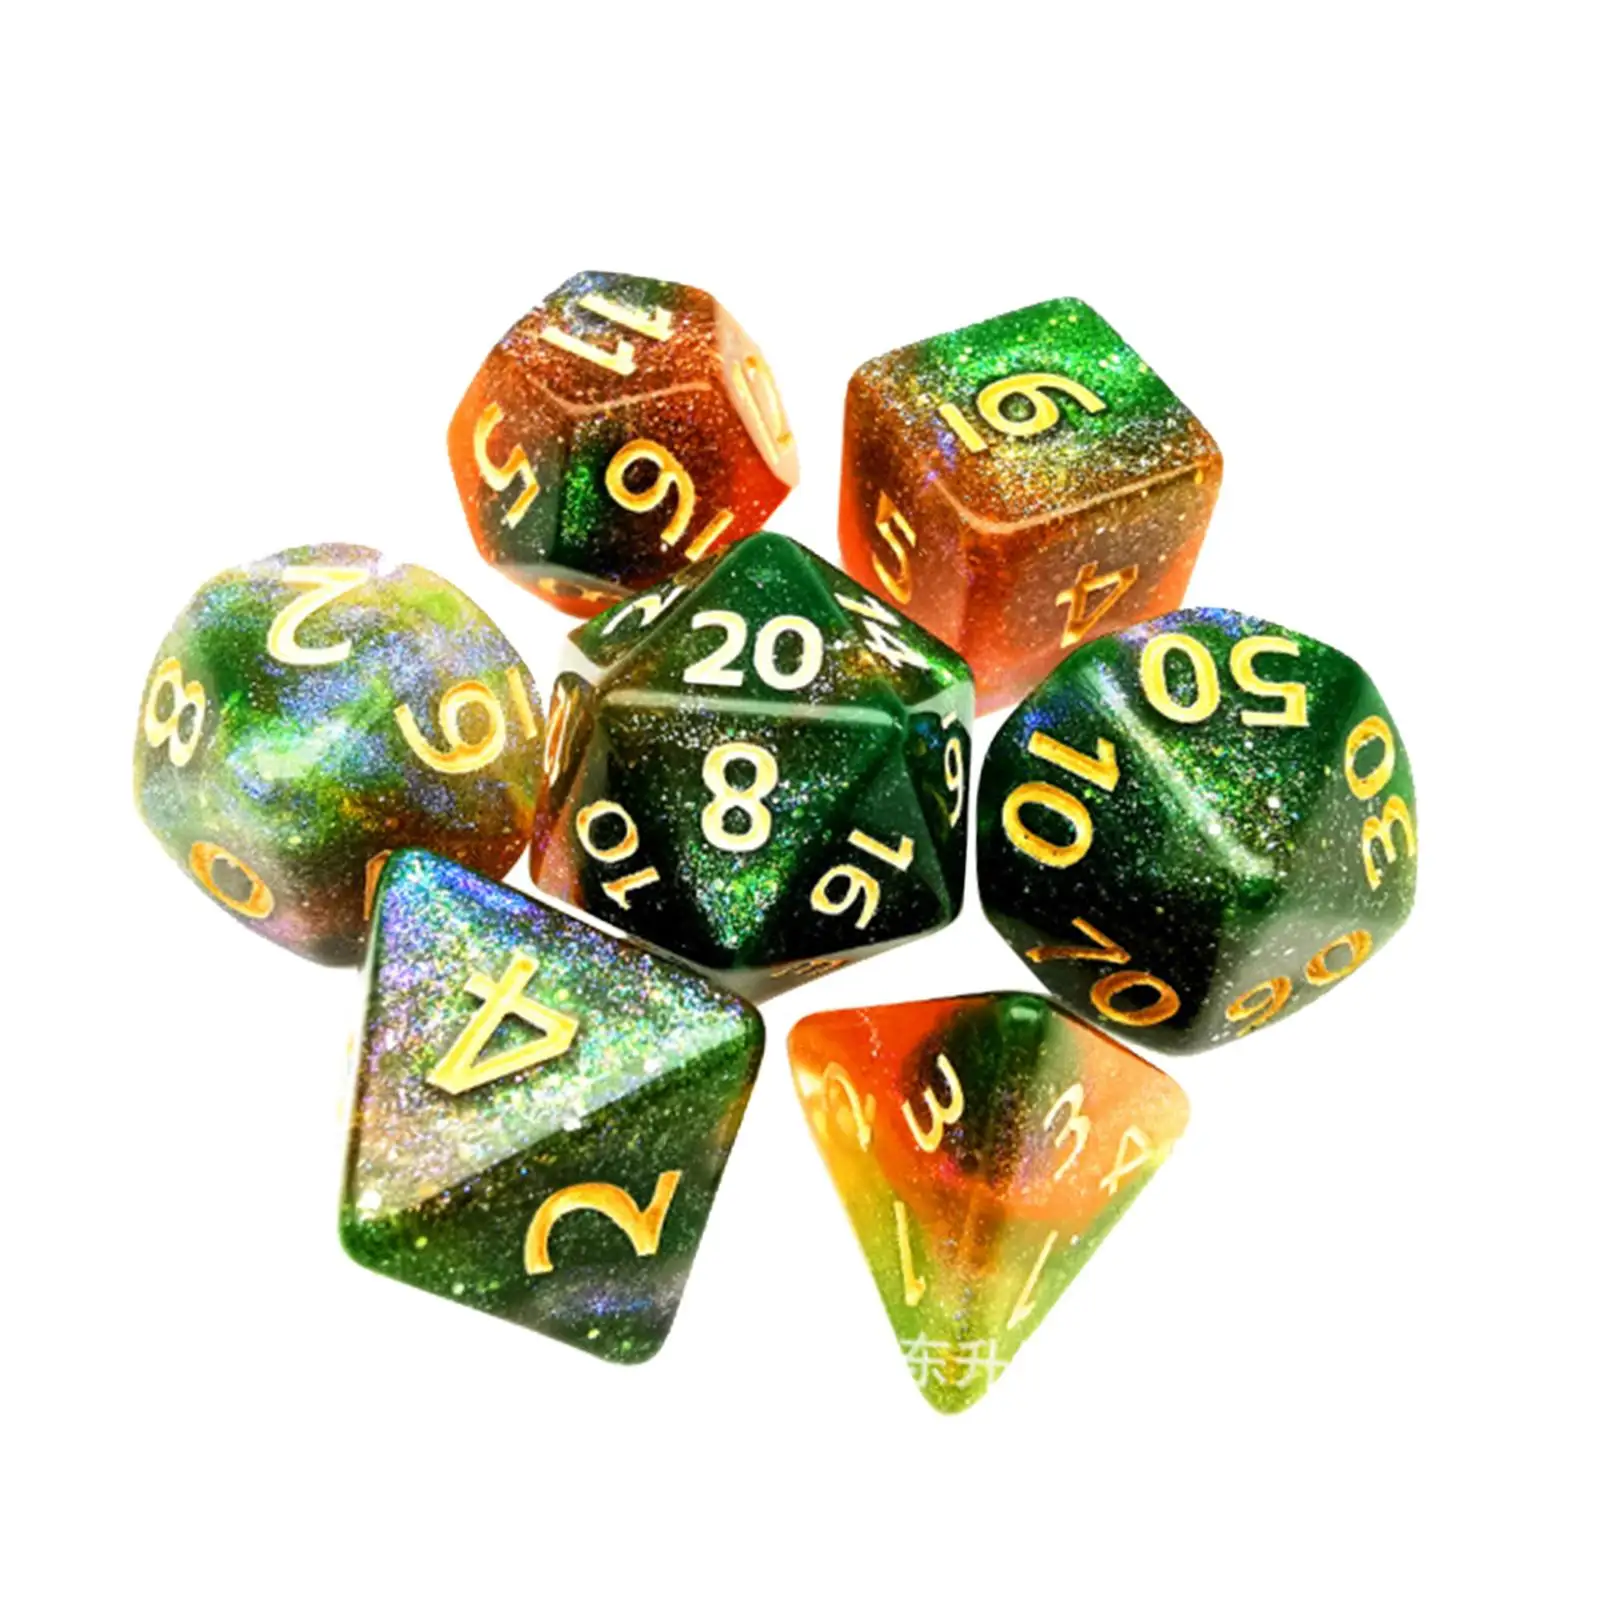 Acrylic Polyhedral Dices Set Toys D8 D10 D12 D20 for MTG Role Playing RPG Table Games Math Teaching